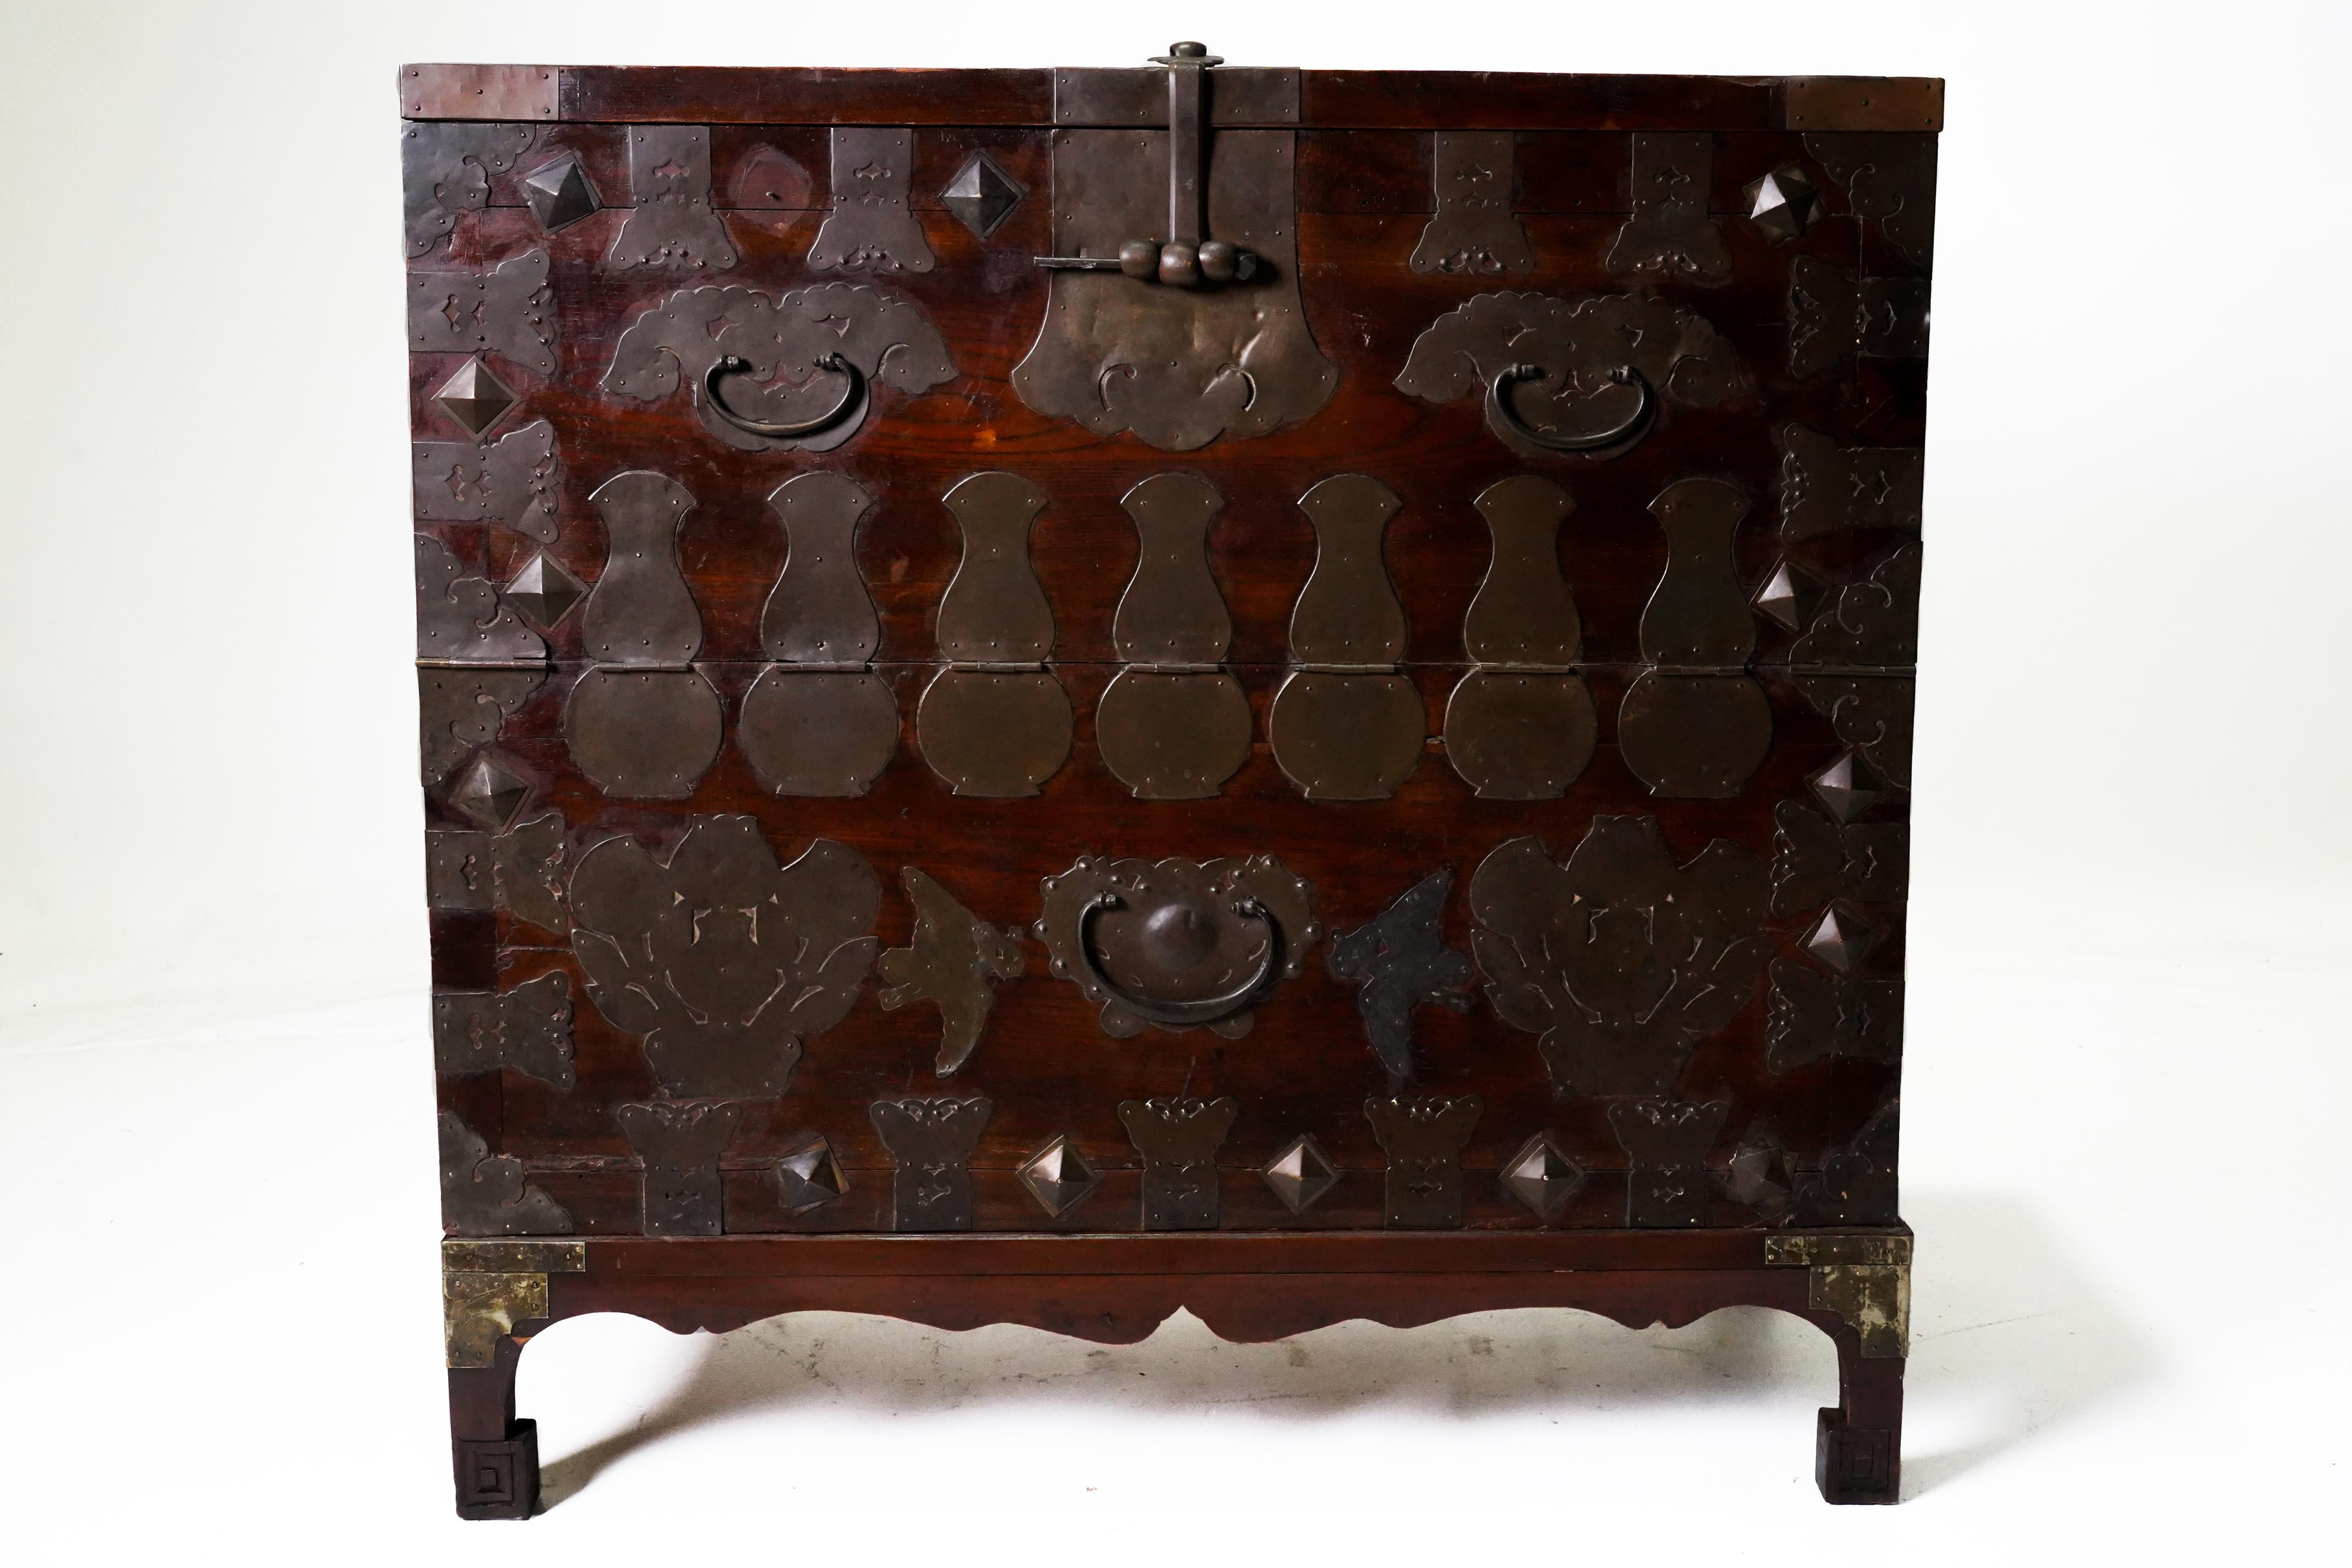 This beautifully ornamented Korean chest once held blankets, clothing and valuables and may have been given as part of a marriage dowry.  The elaborate brass hardware is made from a zinc-rich copper alloy and has been engraved with auspicious